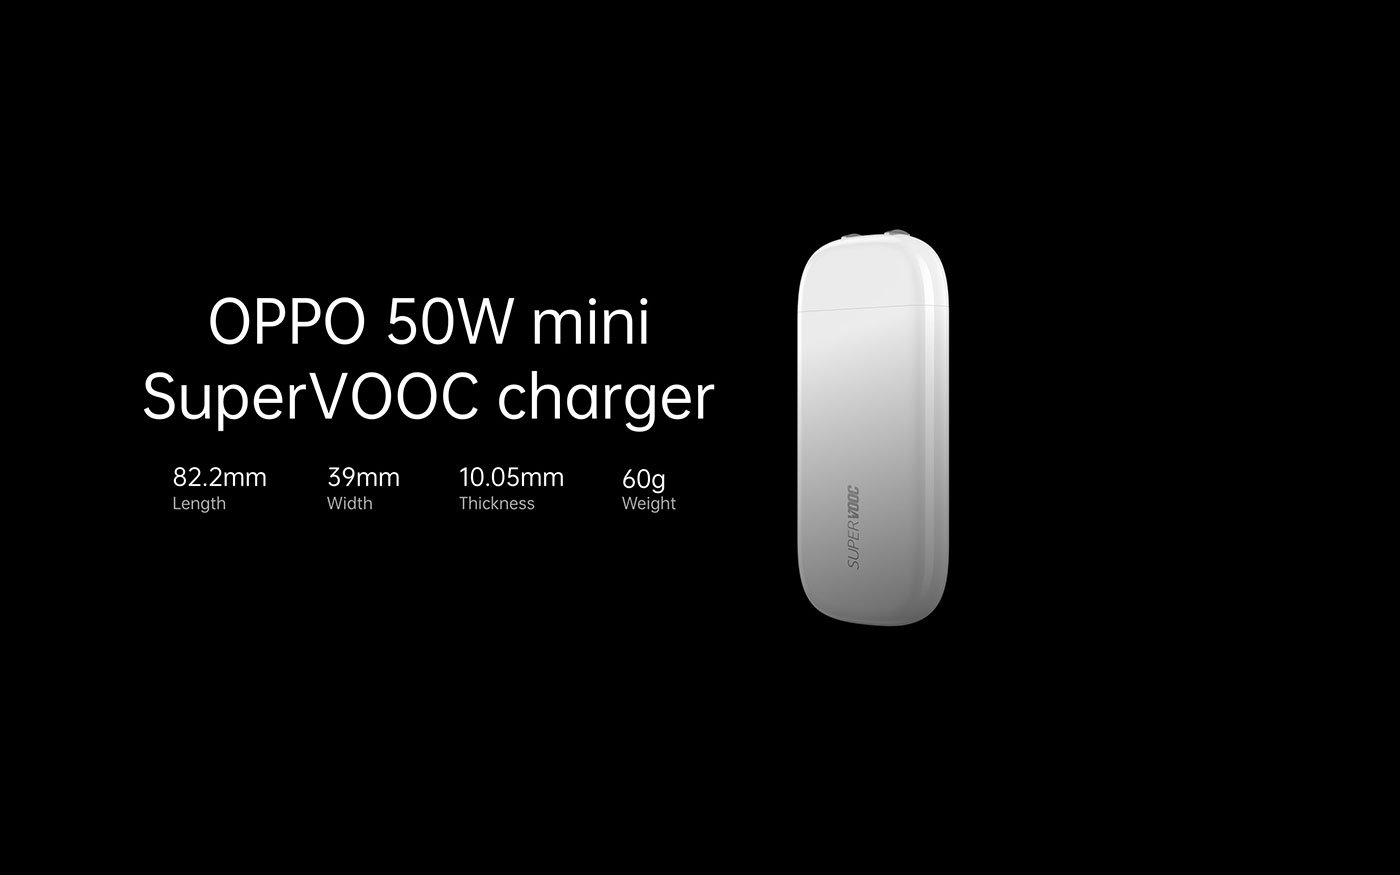 OPPO mini SuperVOOC charger is on sale in China for $ 60